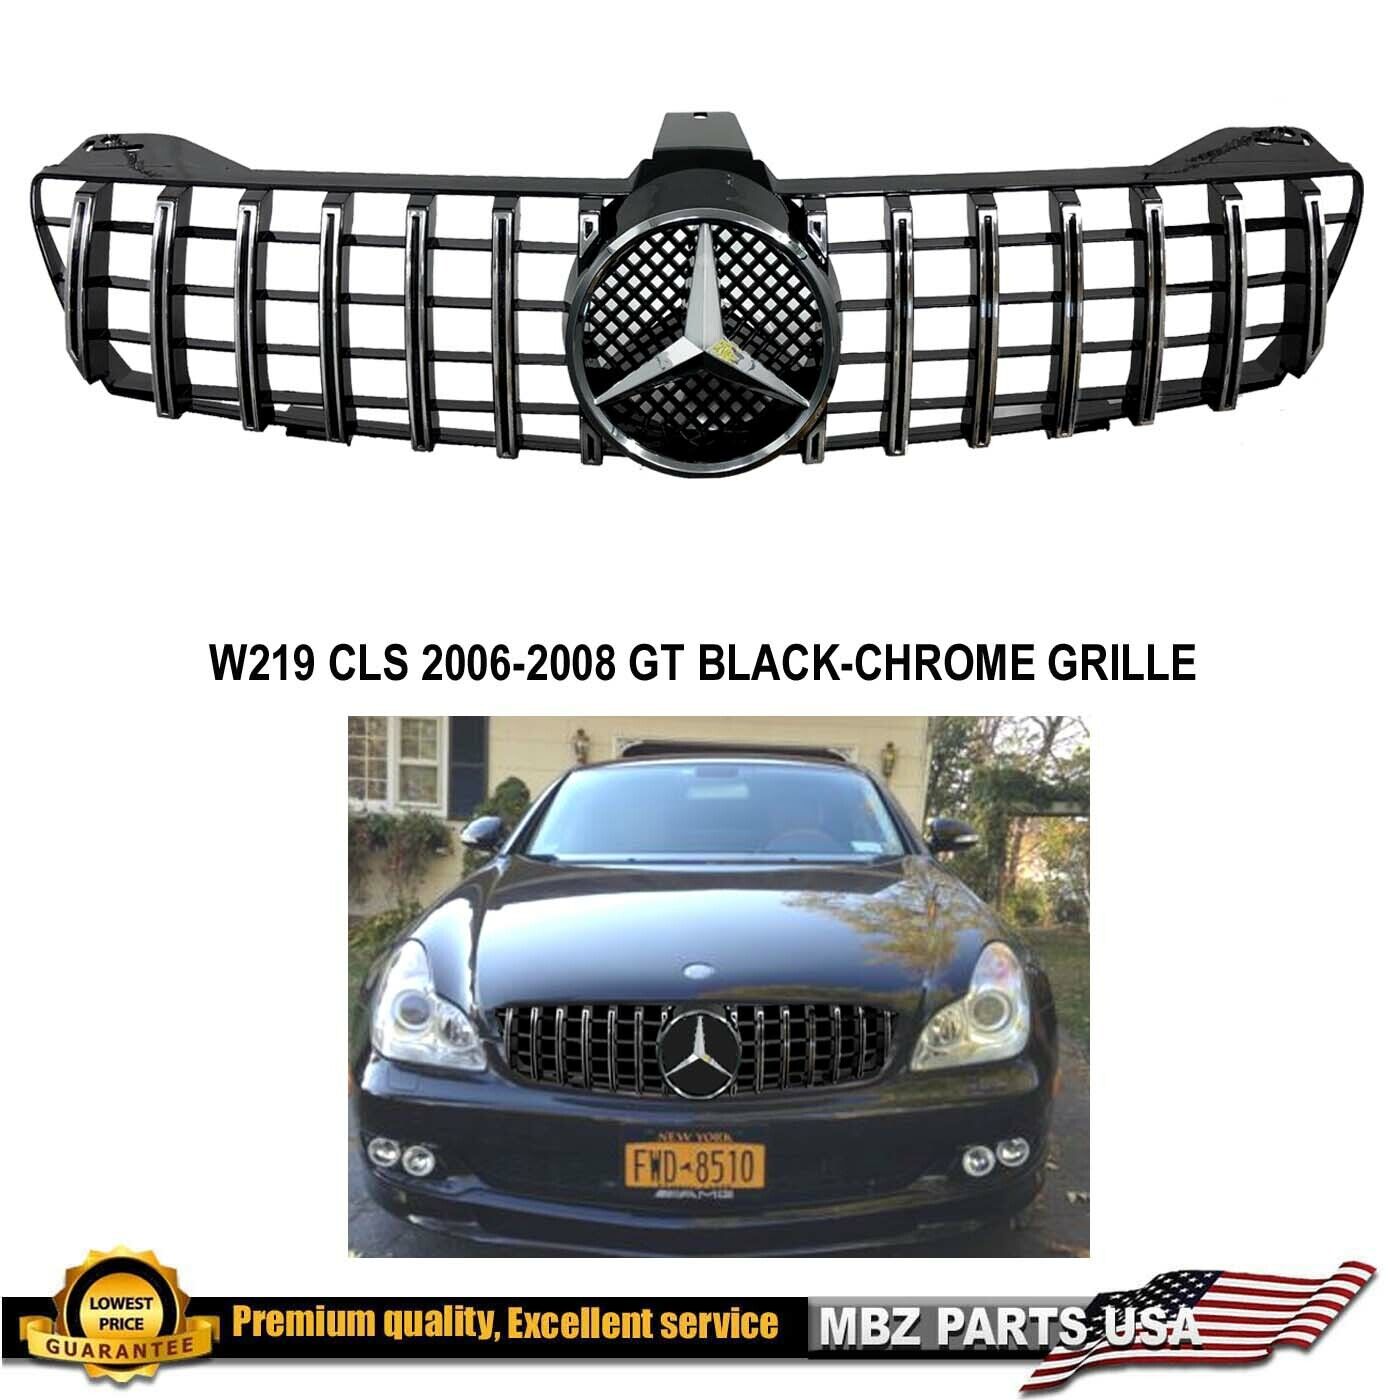 2006 2007 2008 CLS63 CLS550 CLS500 CLS55 GT GRILLE BLACK CHROME AMG W219 NEW GTR